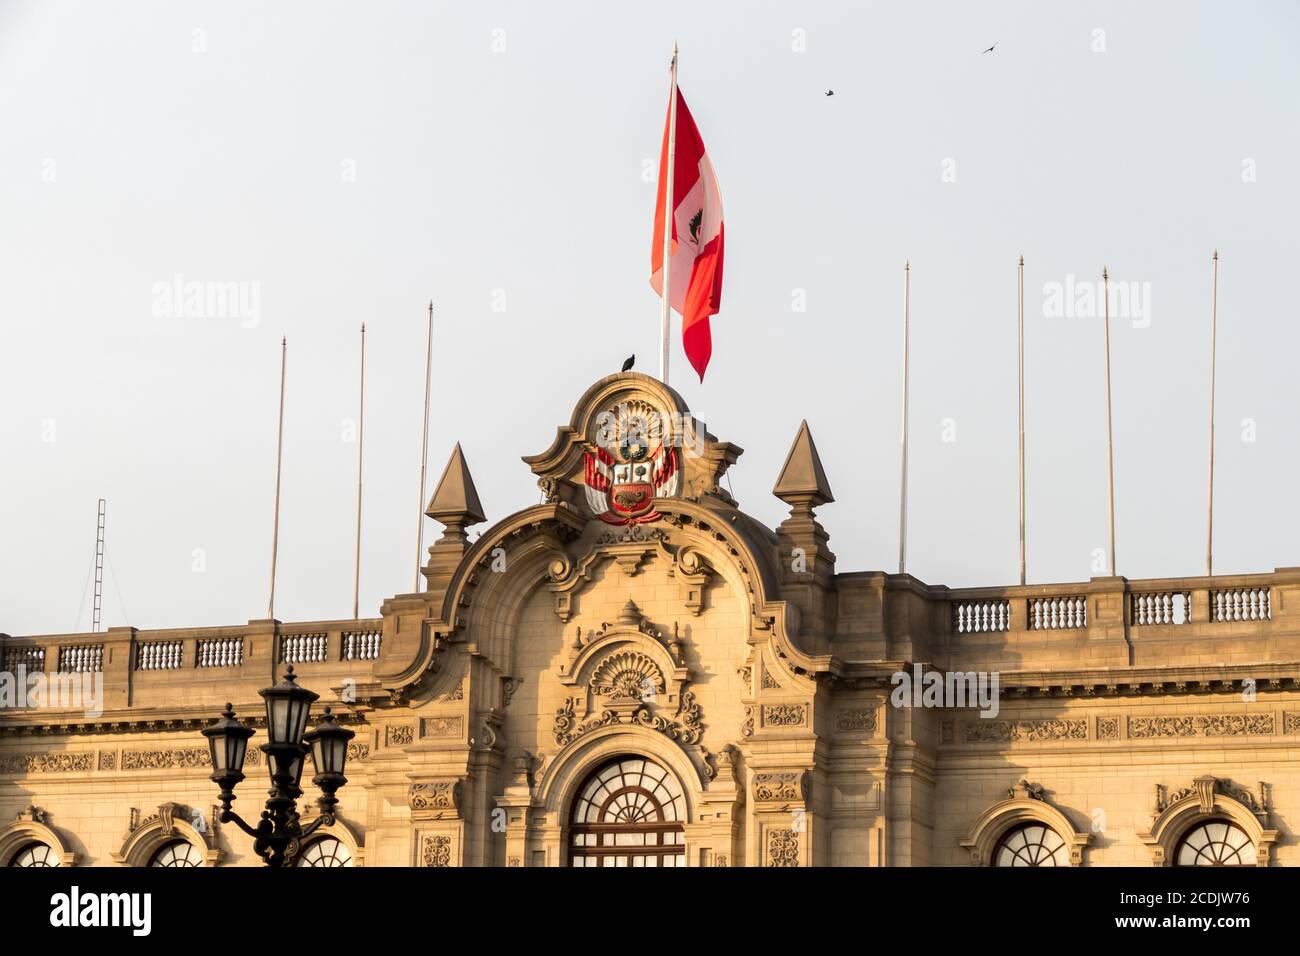 Lima, Peru - october 11, 2018: Facade of president palace in central square of Lima, Peru Stock Photo